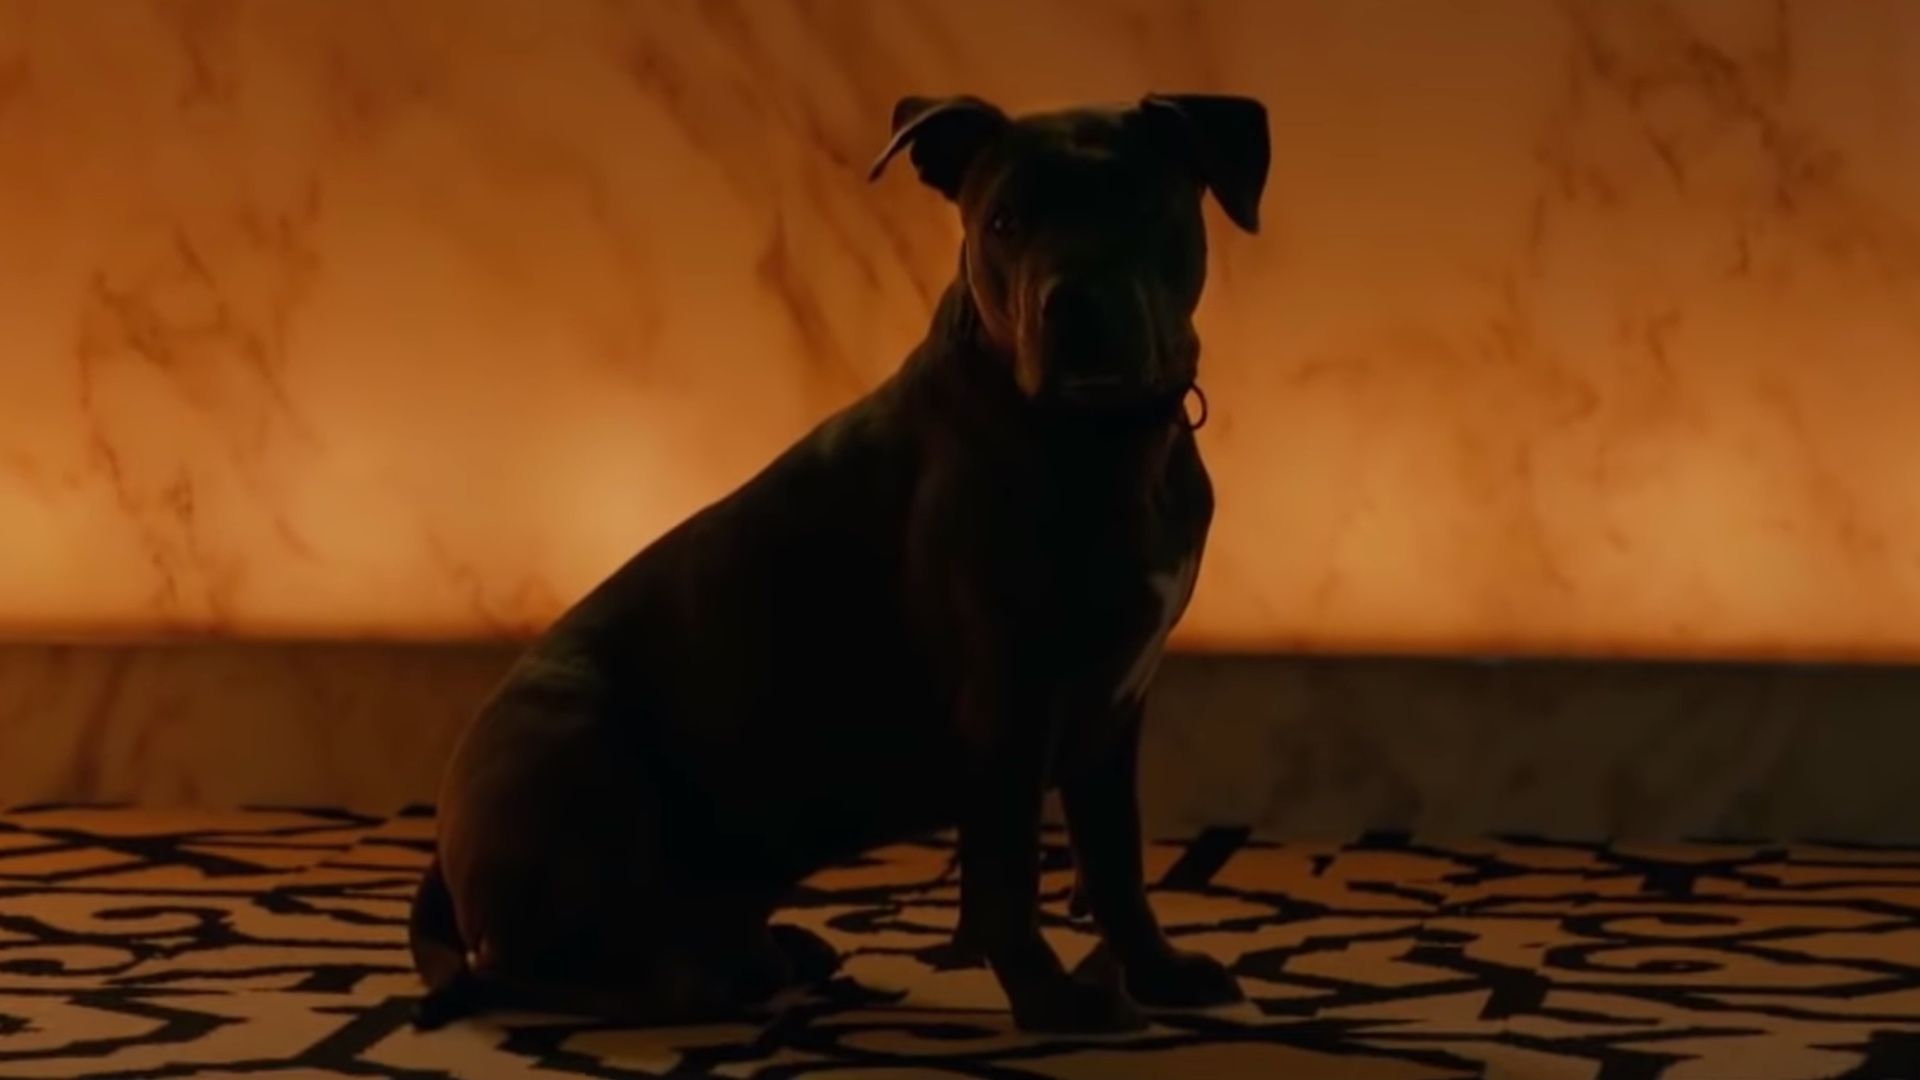 New JOHN WICK: CHAPTER 3 Celebrates National Puppy Day Tale of Two Strays